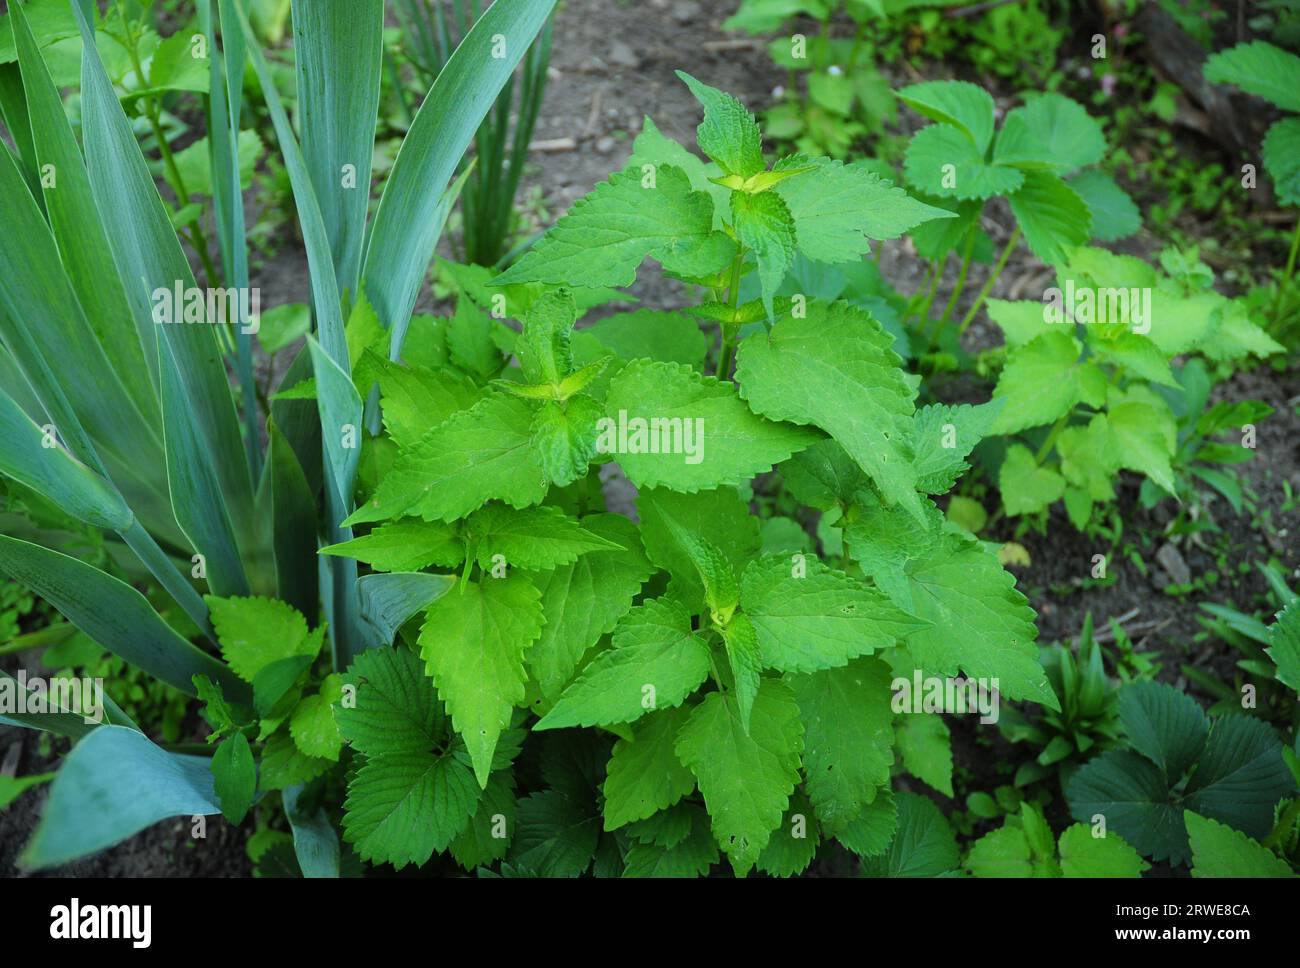 Agastache rugosa, also known as wrinkled giant hyssop, Korean mint, purple giant hyssop, Indian mint and Chinese patchouli is an aromatic herb in the Stock Photo